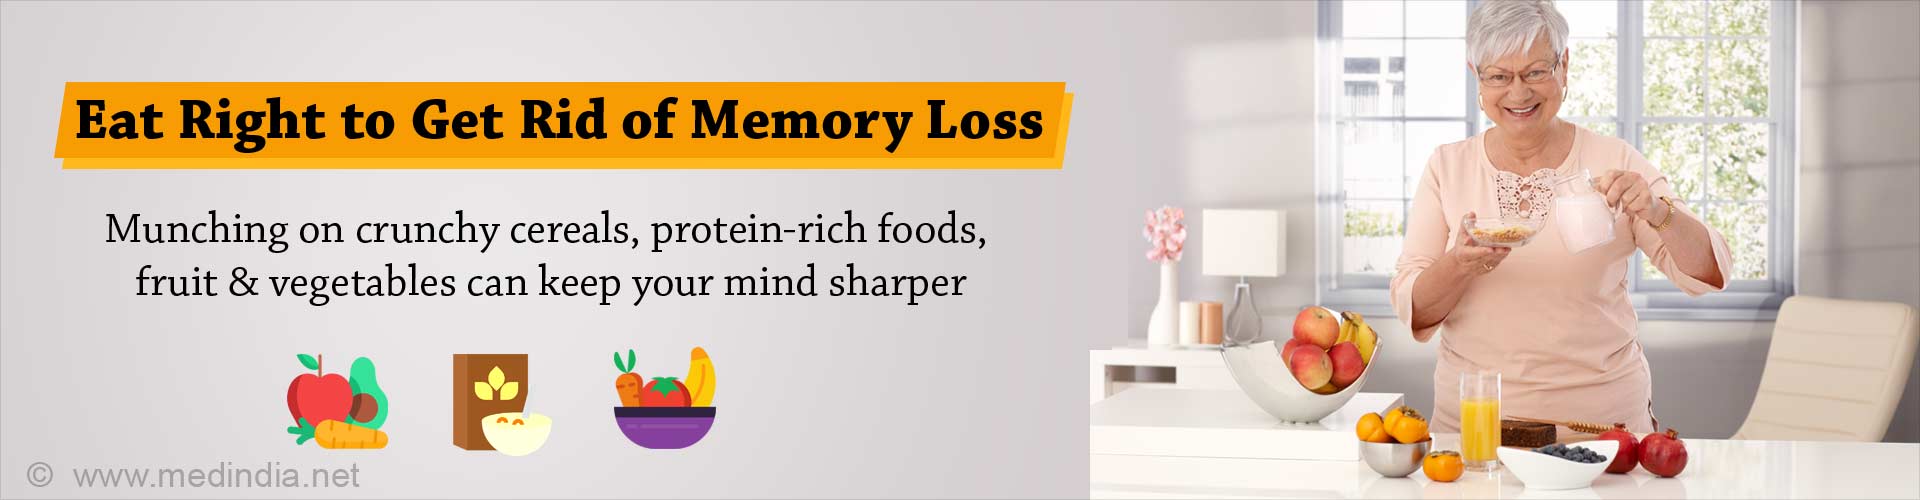 Eat right to get rid of memory loss. Munching on crunchy cereals, protein-rich foods, fruit and vegetables can keep your mind sharper.